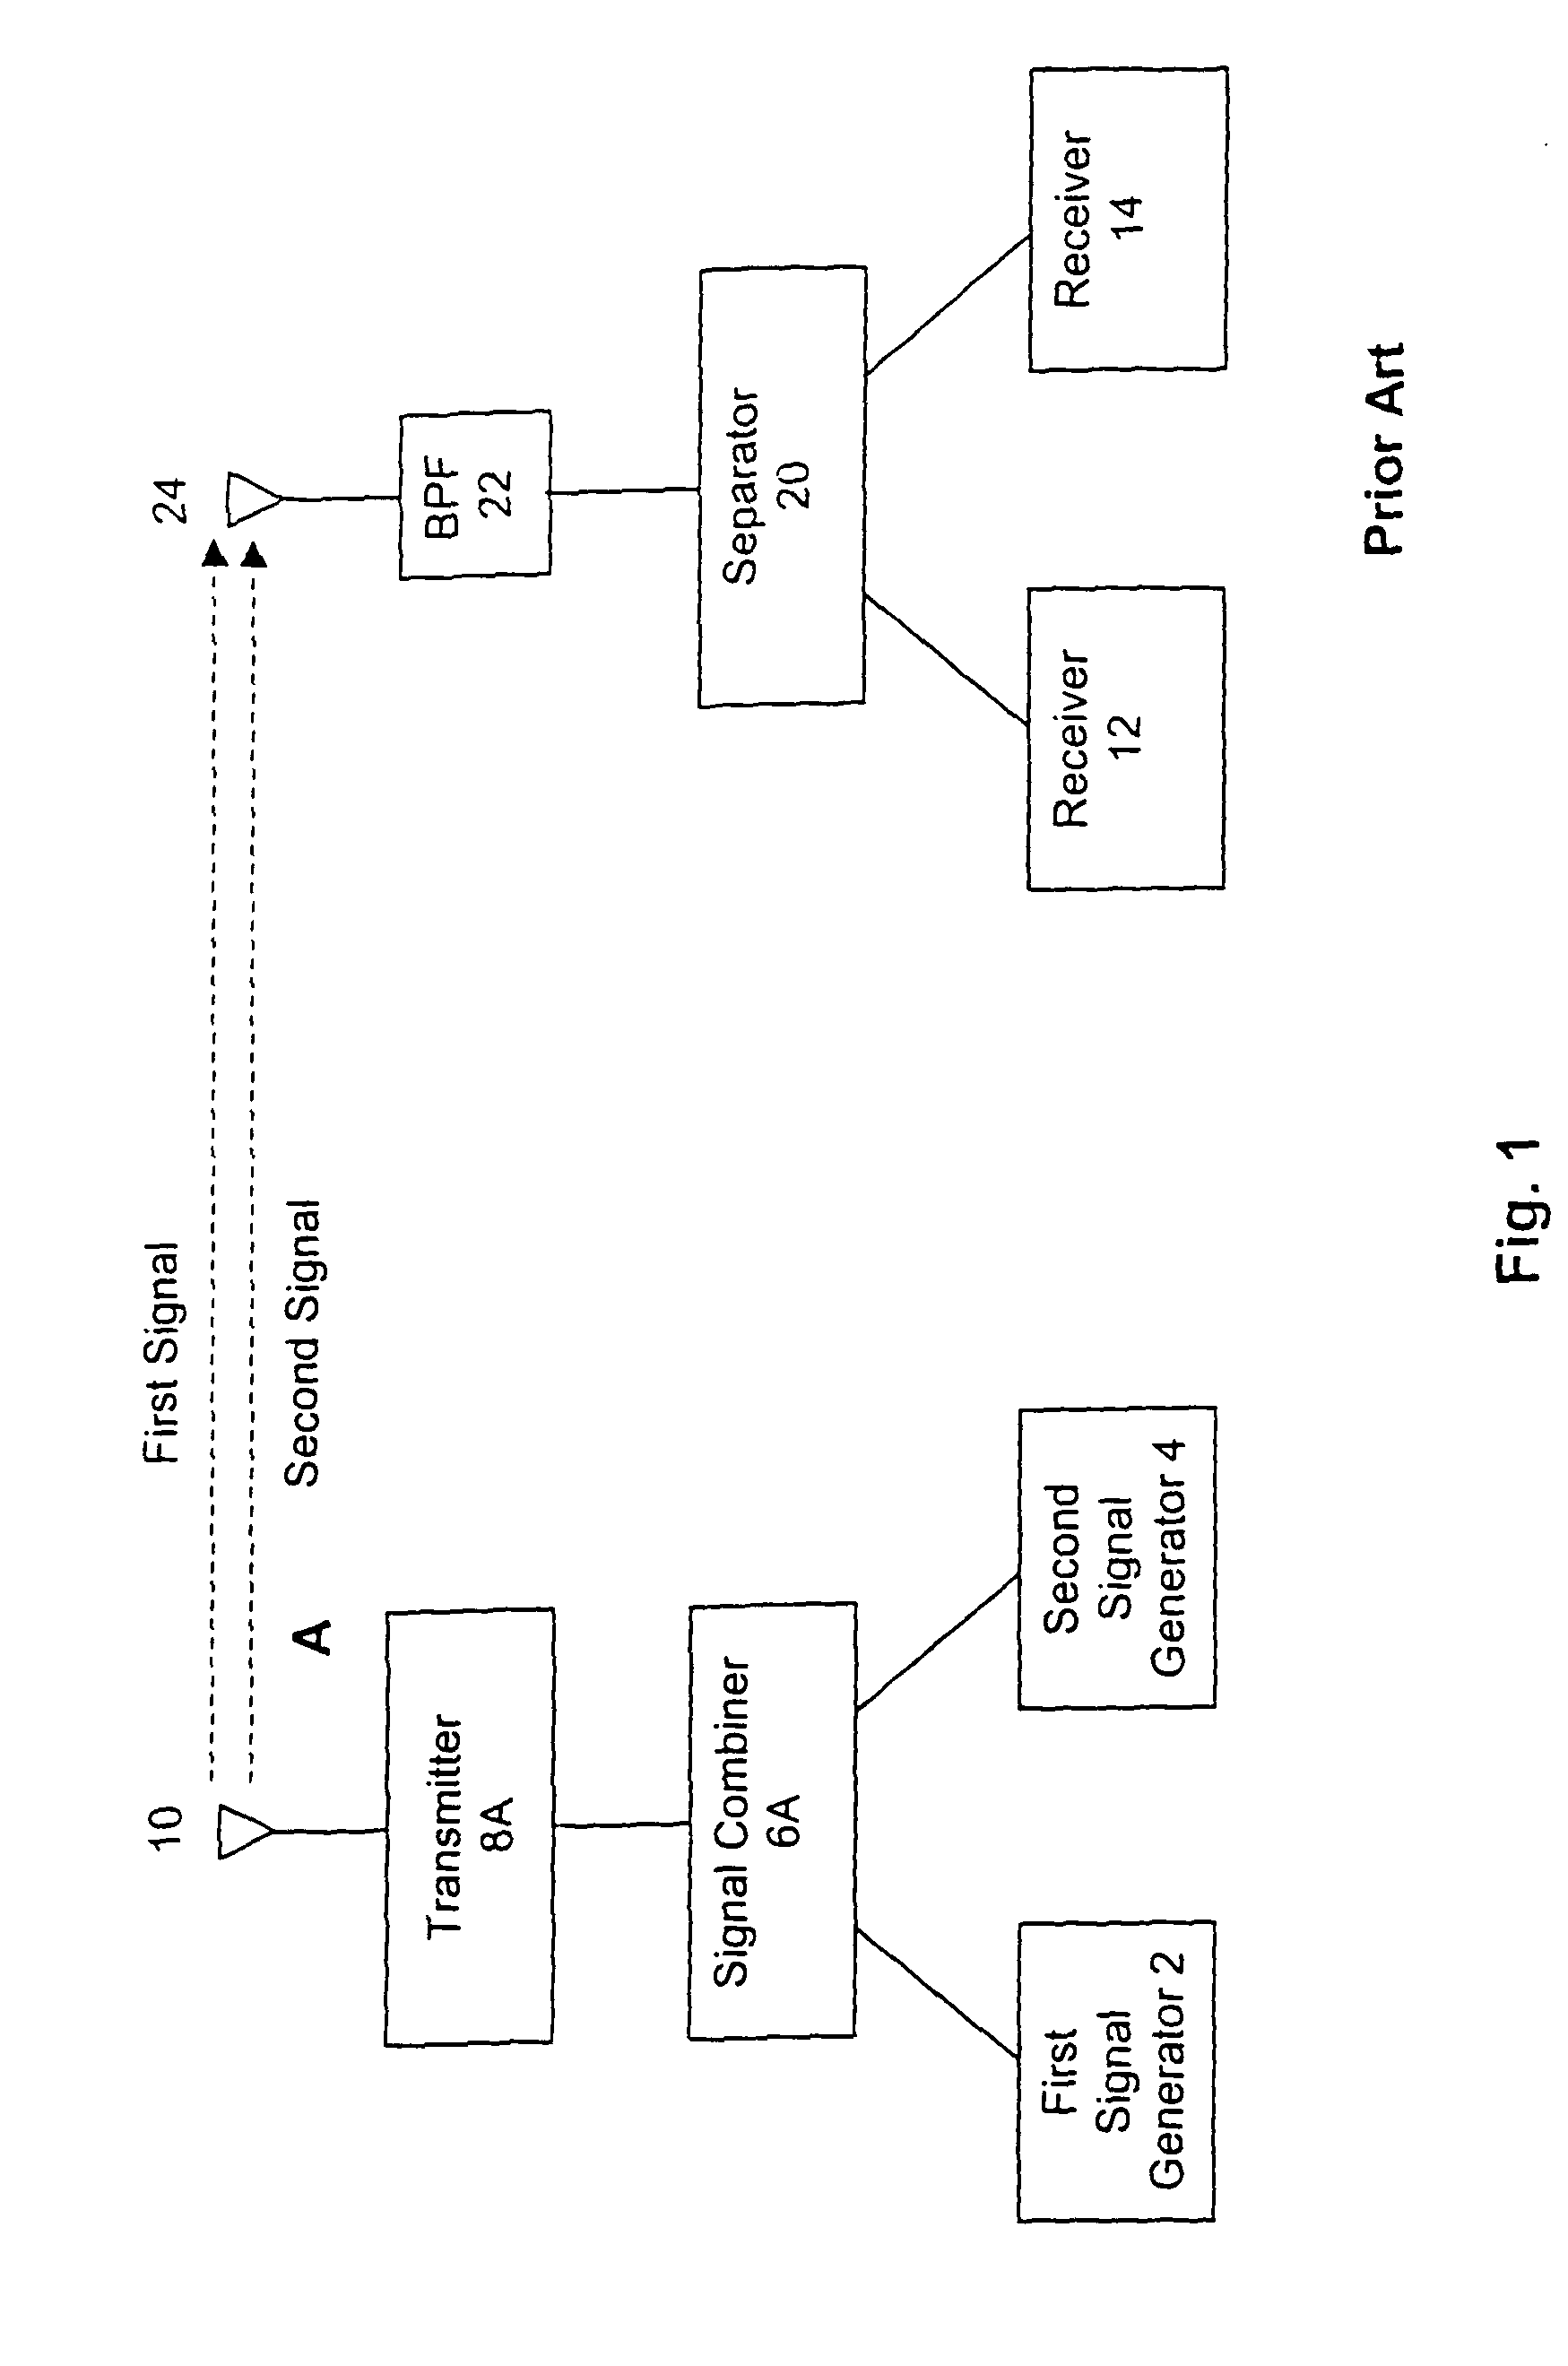 Interference reduction for multiple signals